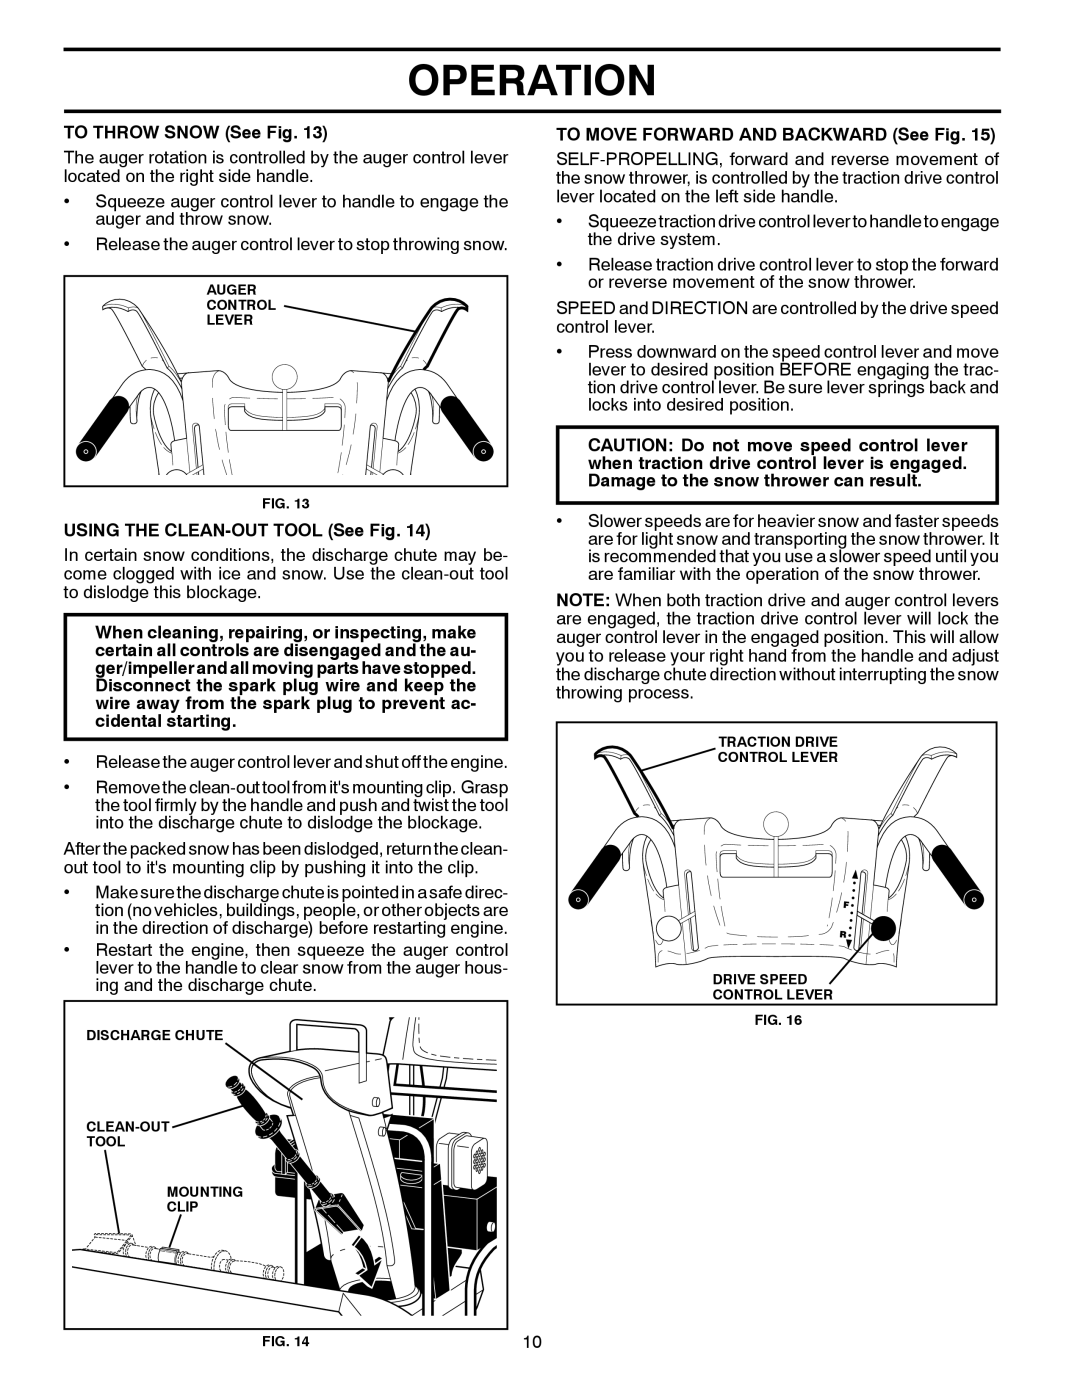 McCulloch 96192004100, MC627ES owner manual Operation, TO THROW SNOW See Fig, USING THE CLEAN-OUT TOOL See Fig 